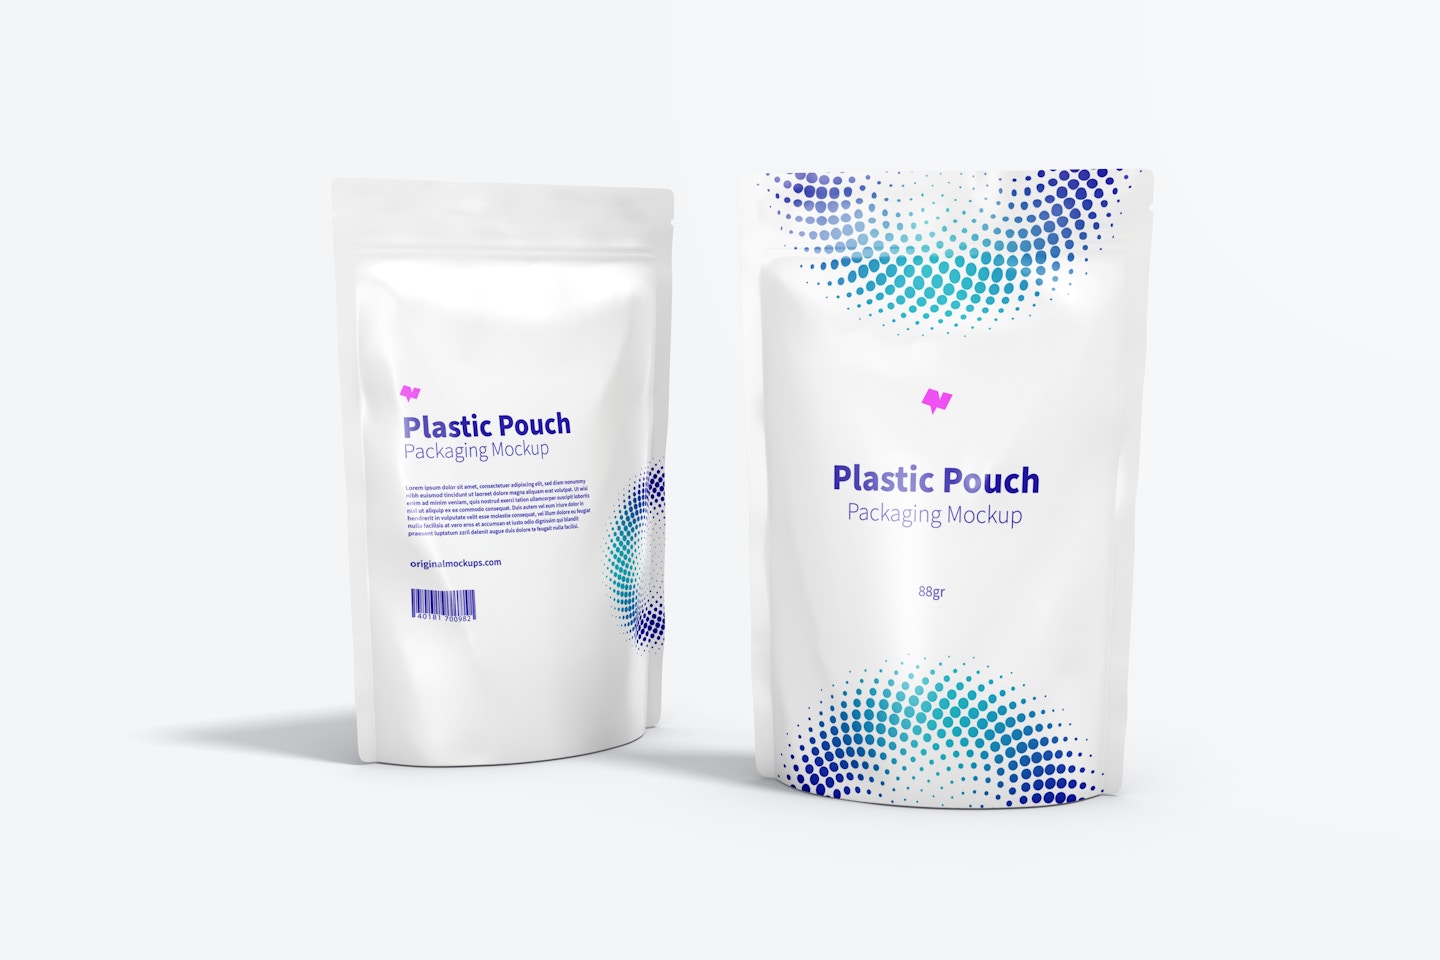 Plastic Pouches Packaging Mockup